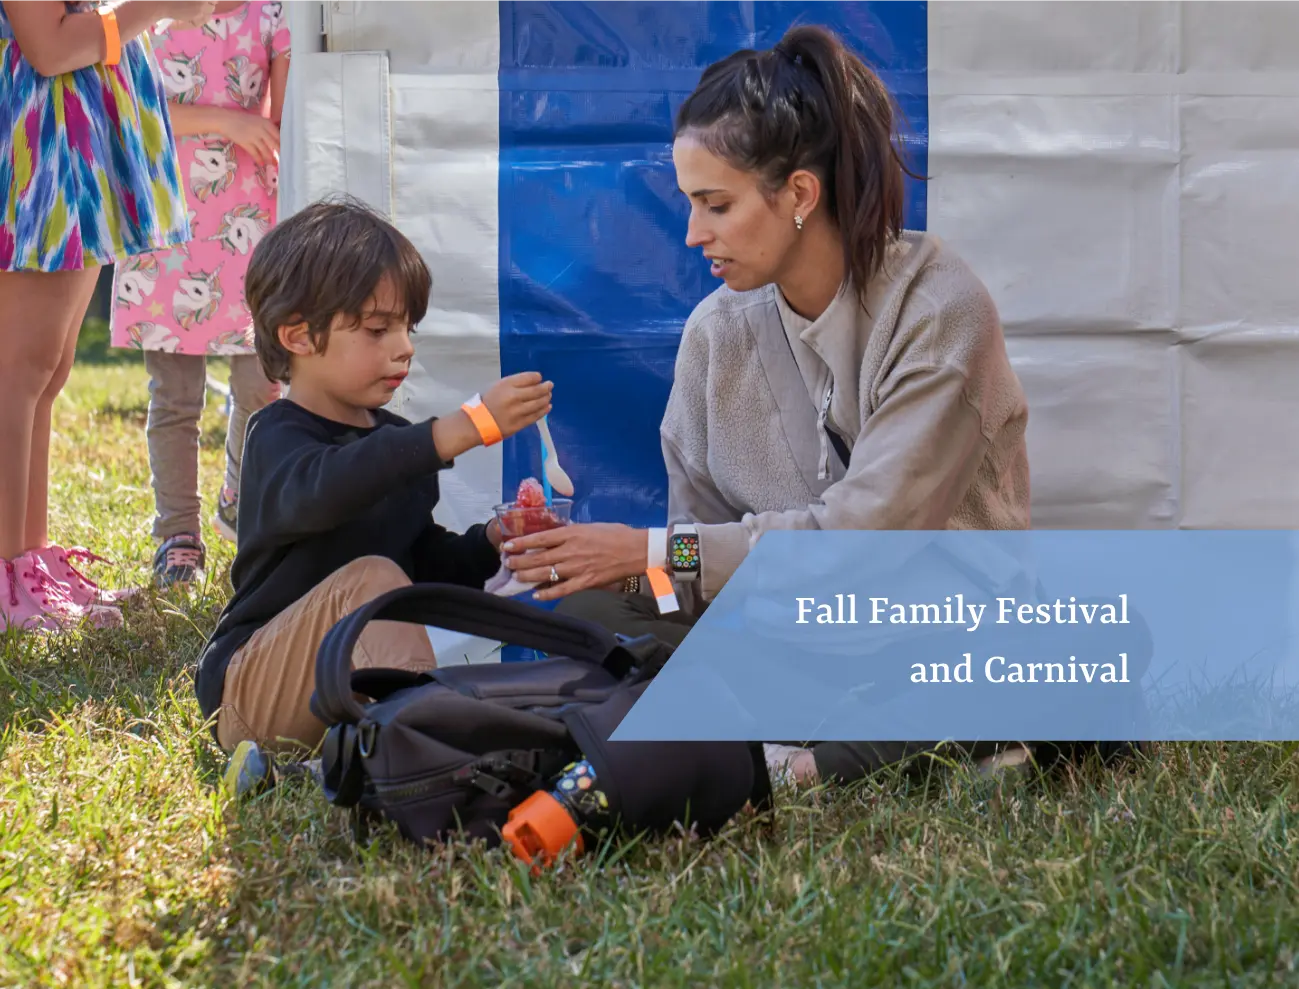 Woman and child having fun at Fall Family Festival and Carnival